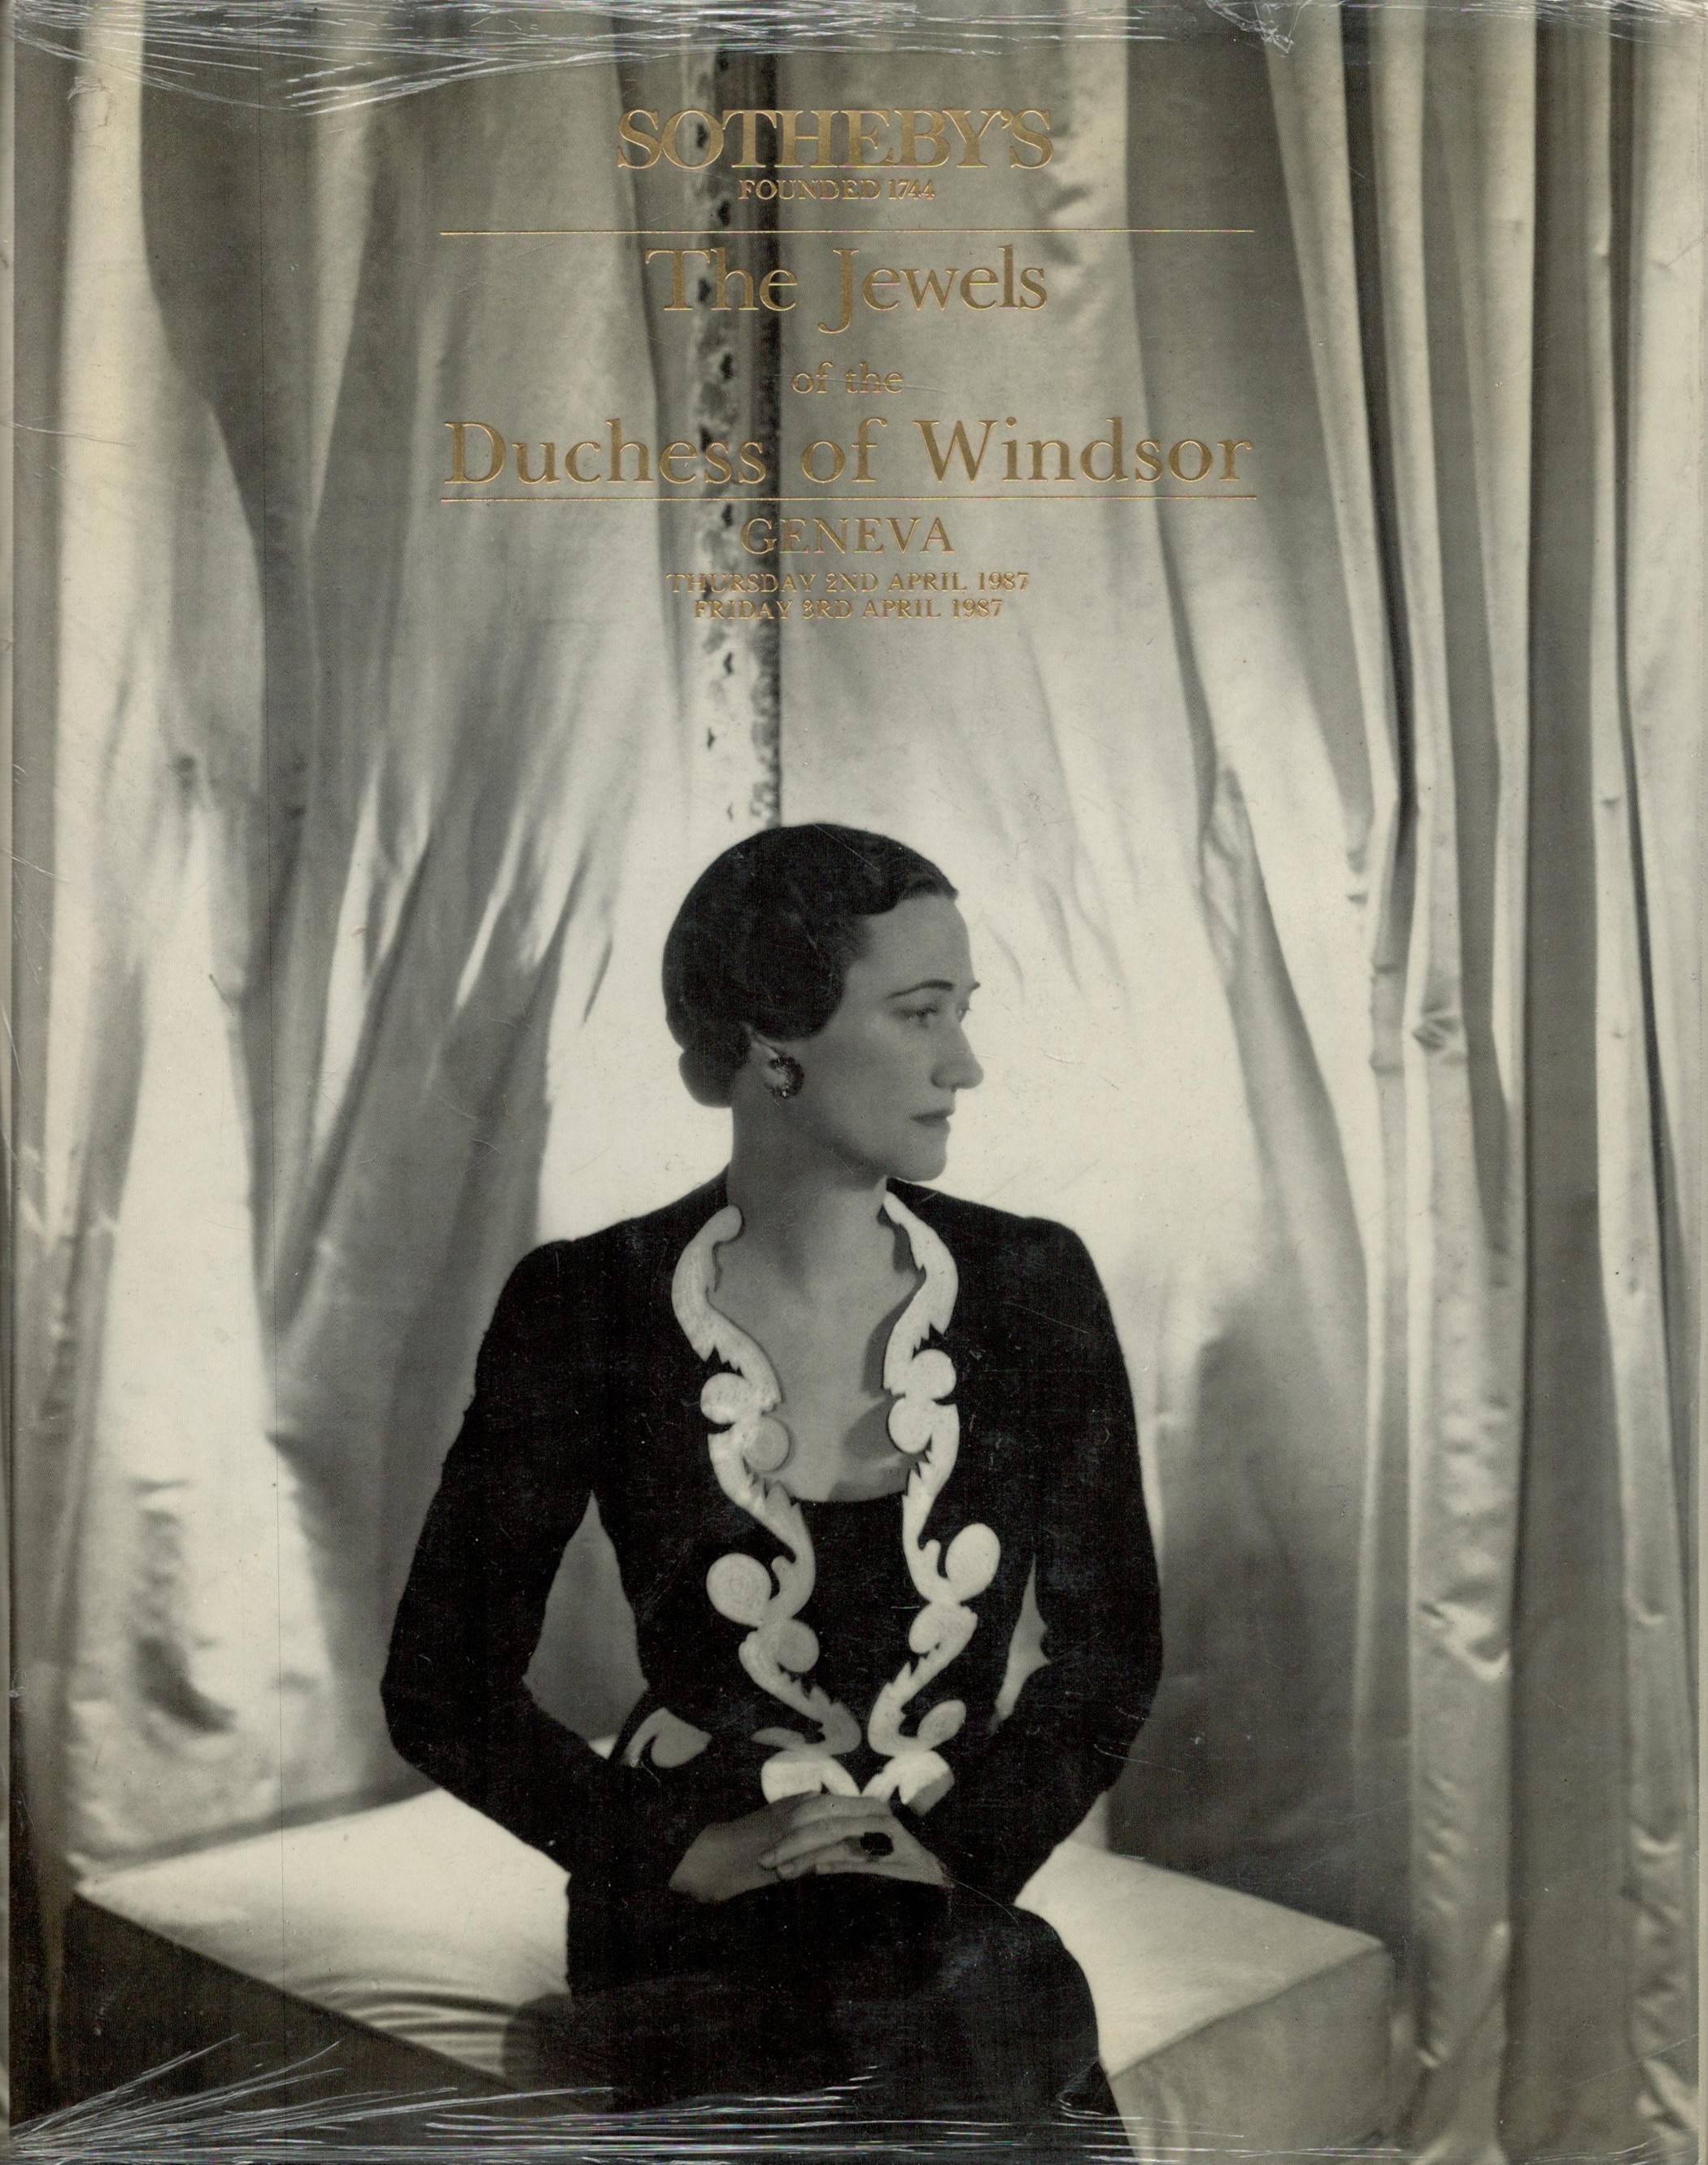 The Jewels of the late Duchess of Windsor 1987 First Edition Hardback Book Catalogue published by